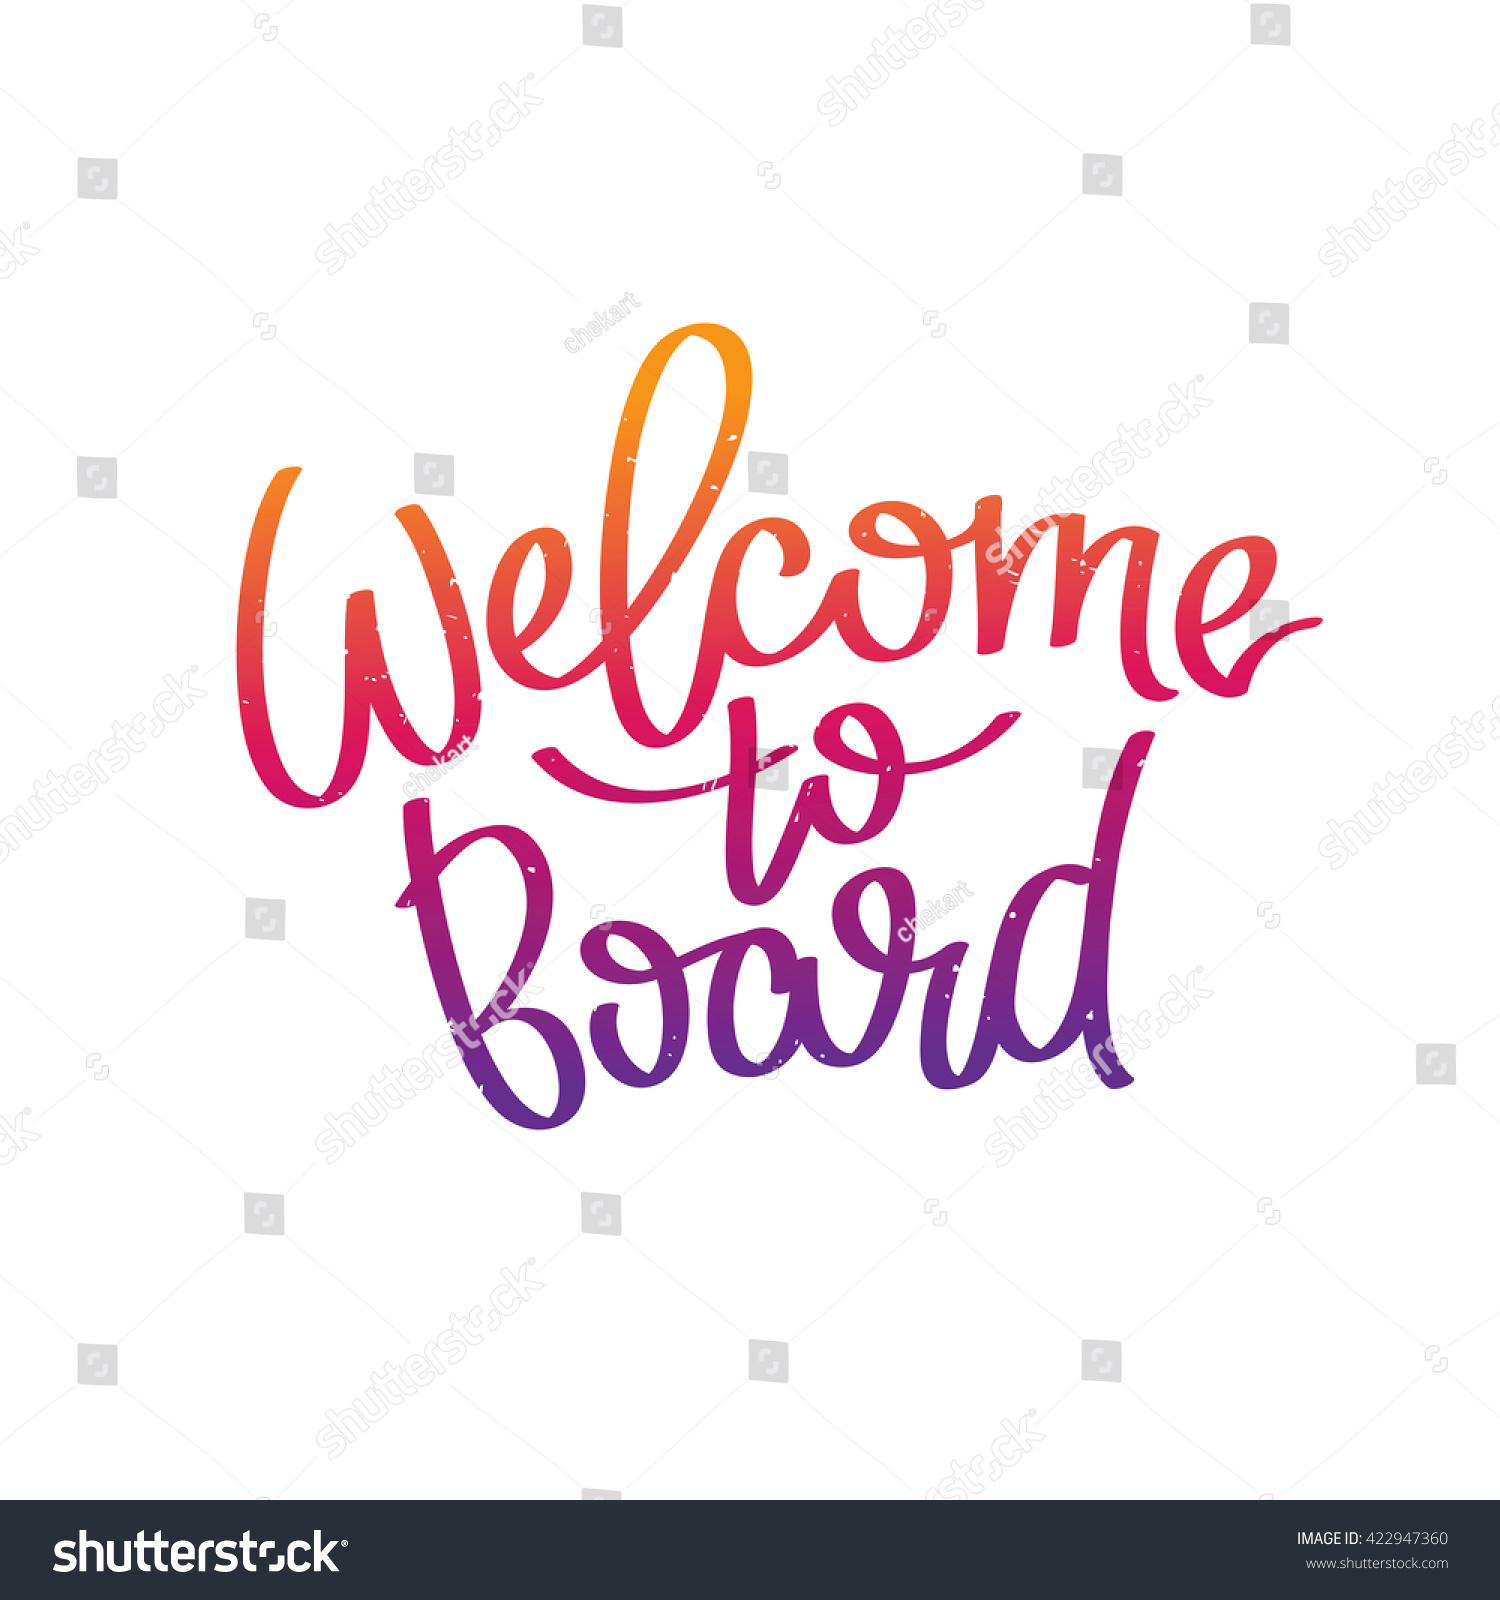 Welcome to board. The trend calligraphy. Vector illustration on white background. #422947360